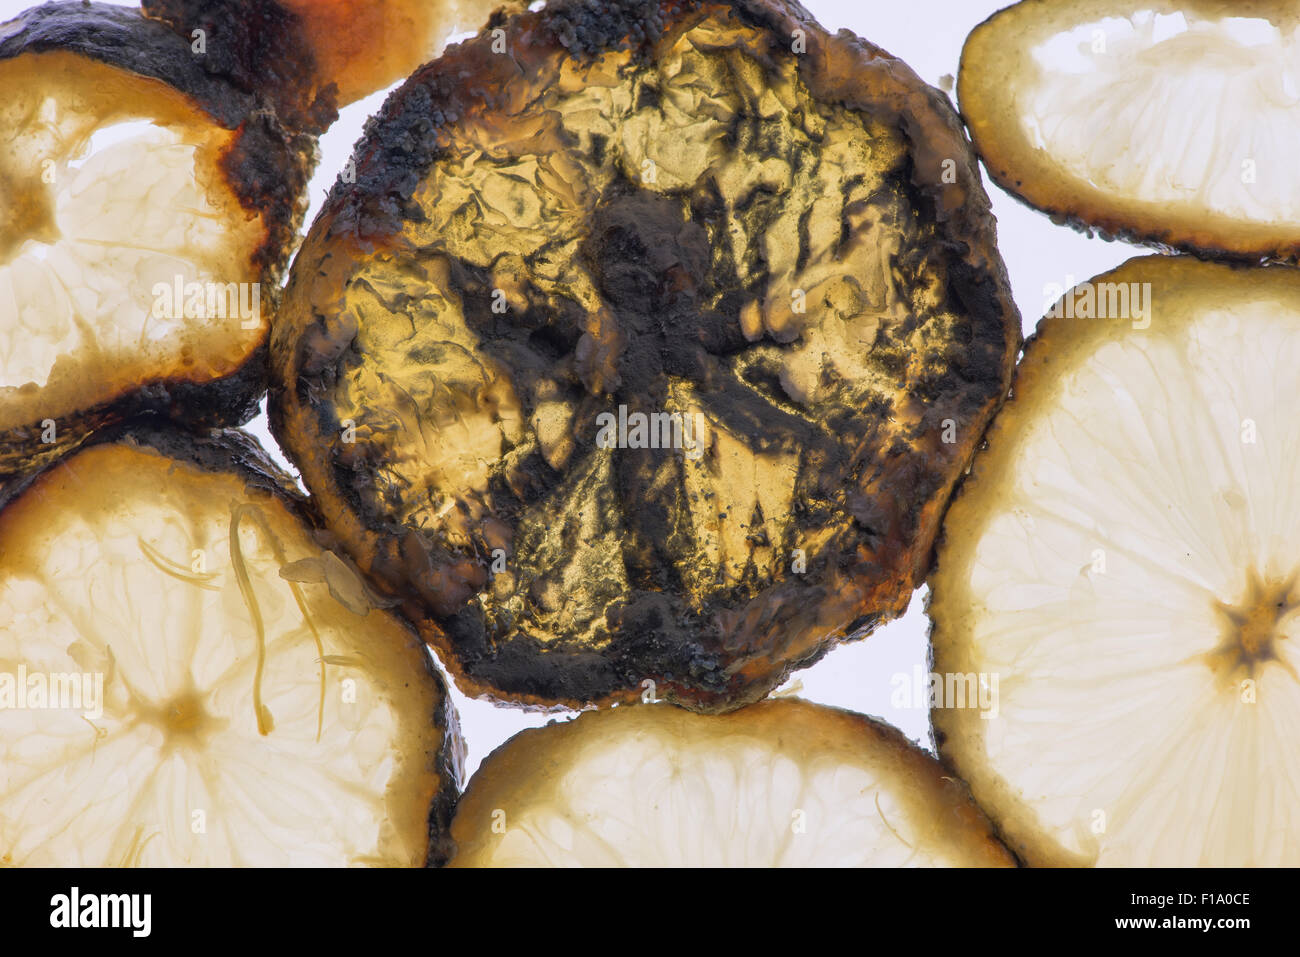 lemon fruit section slice slices isolated against bright white background showing signs of decay fungi hyphae penicillin Stock Photo